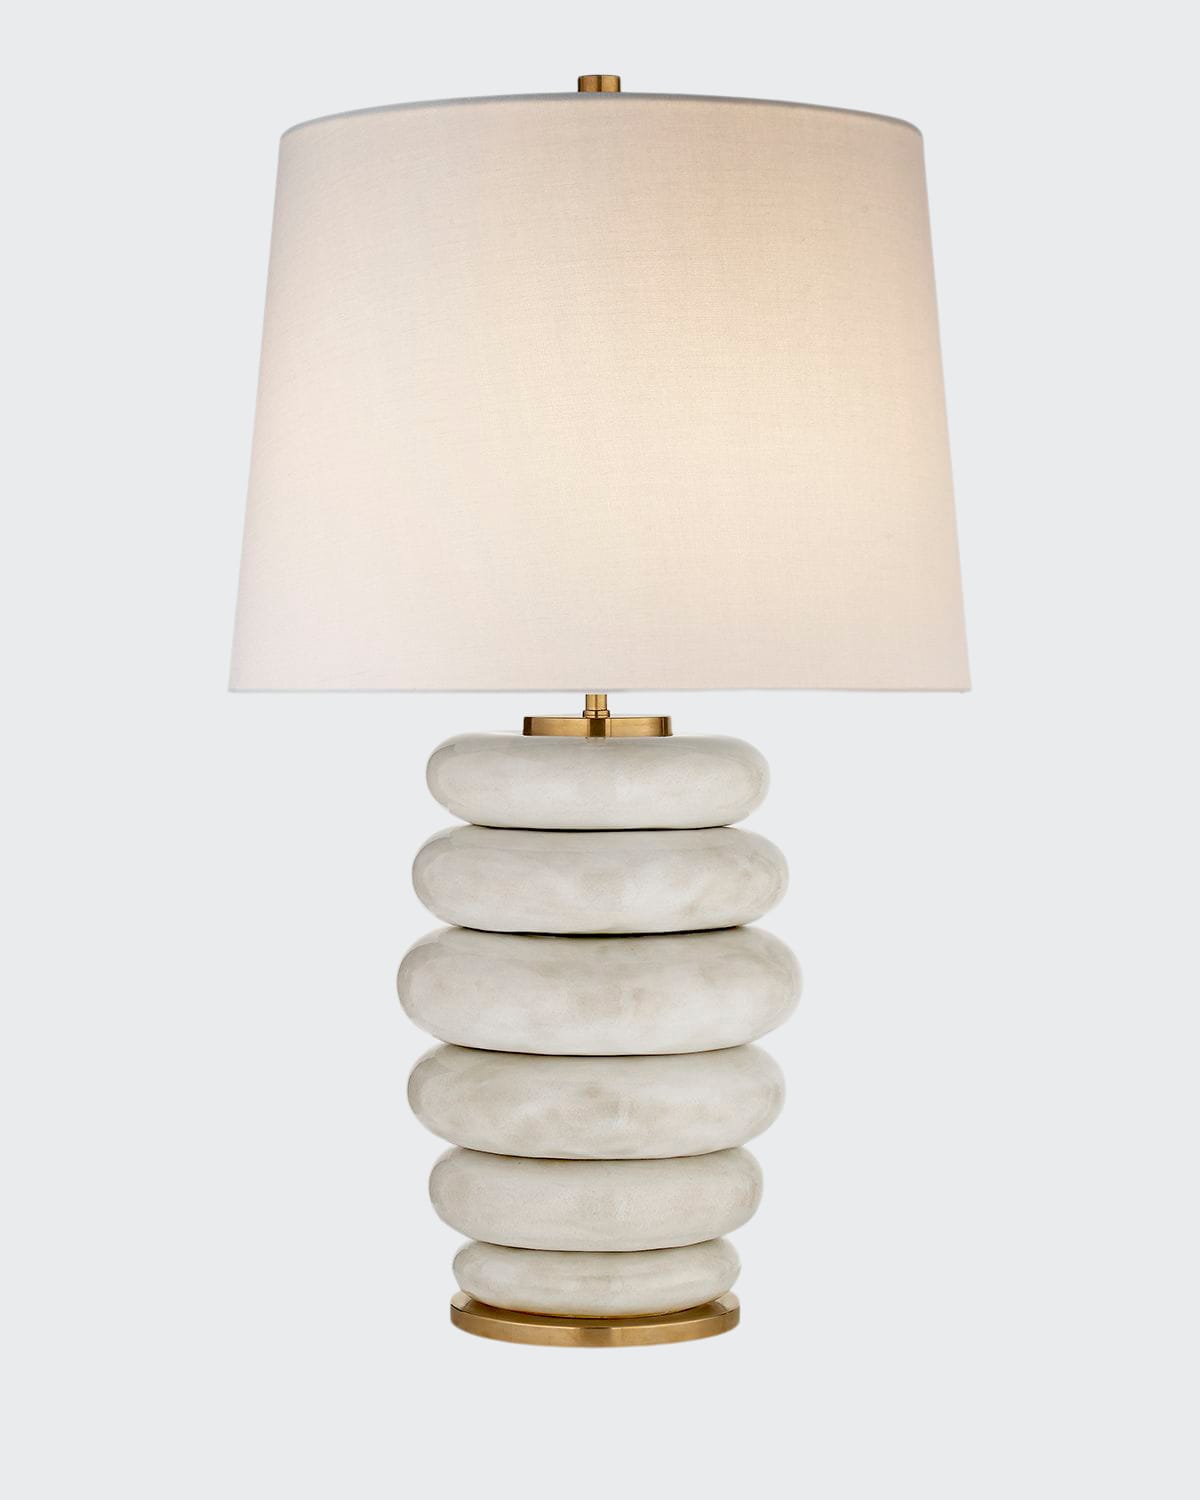 Kelly Wearstler For Visual Comfort Signature Phoebe Stacked Table Lamp In Antique White